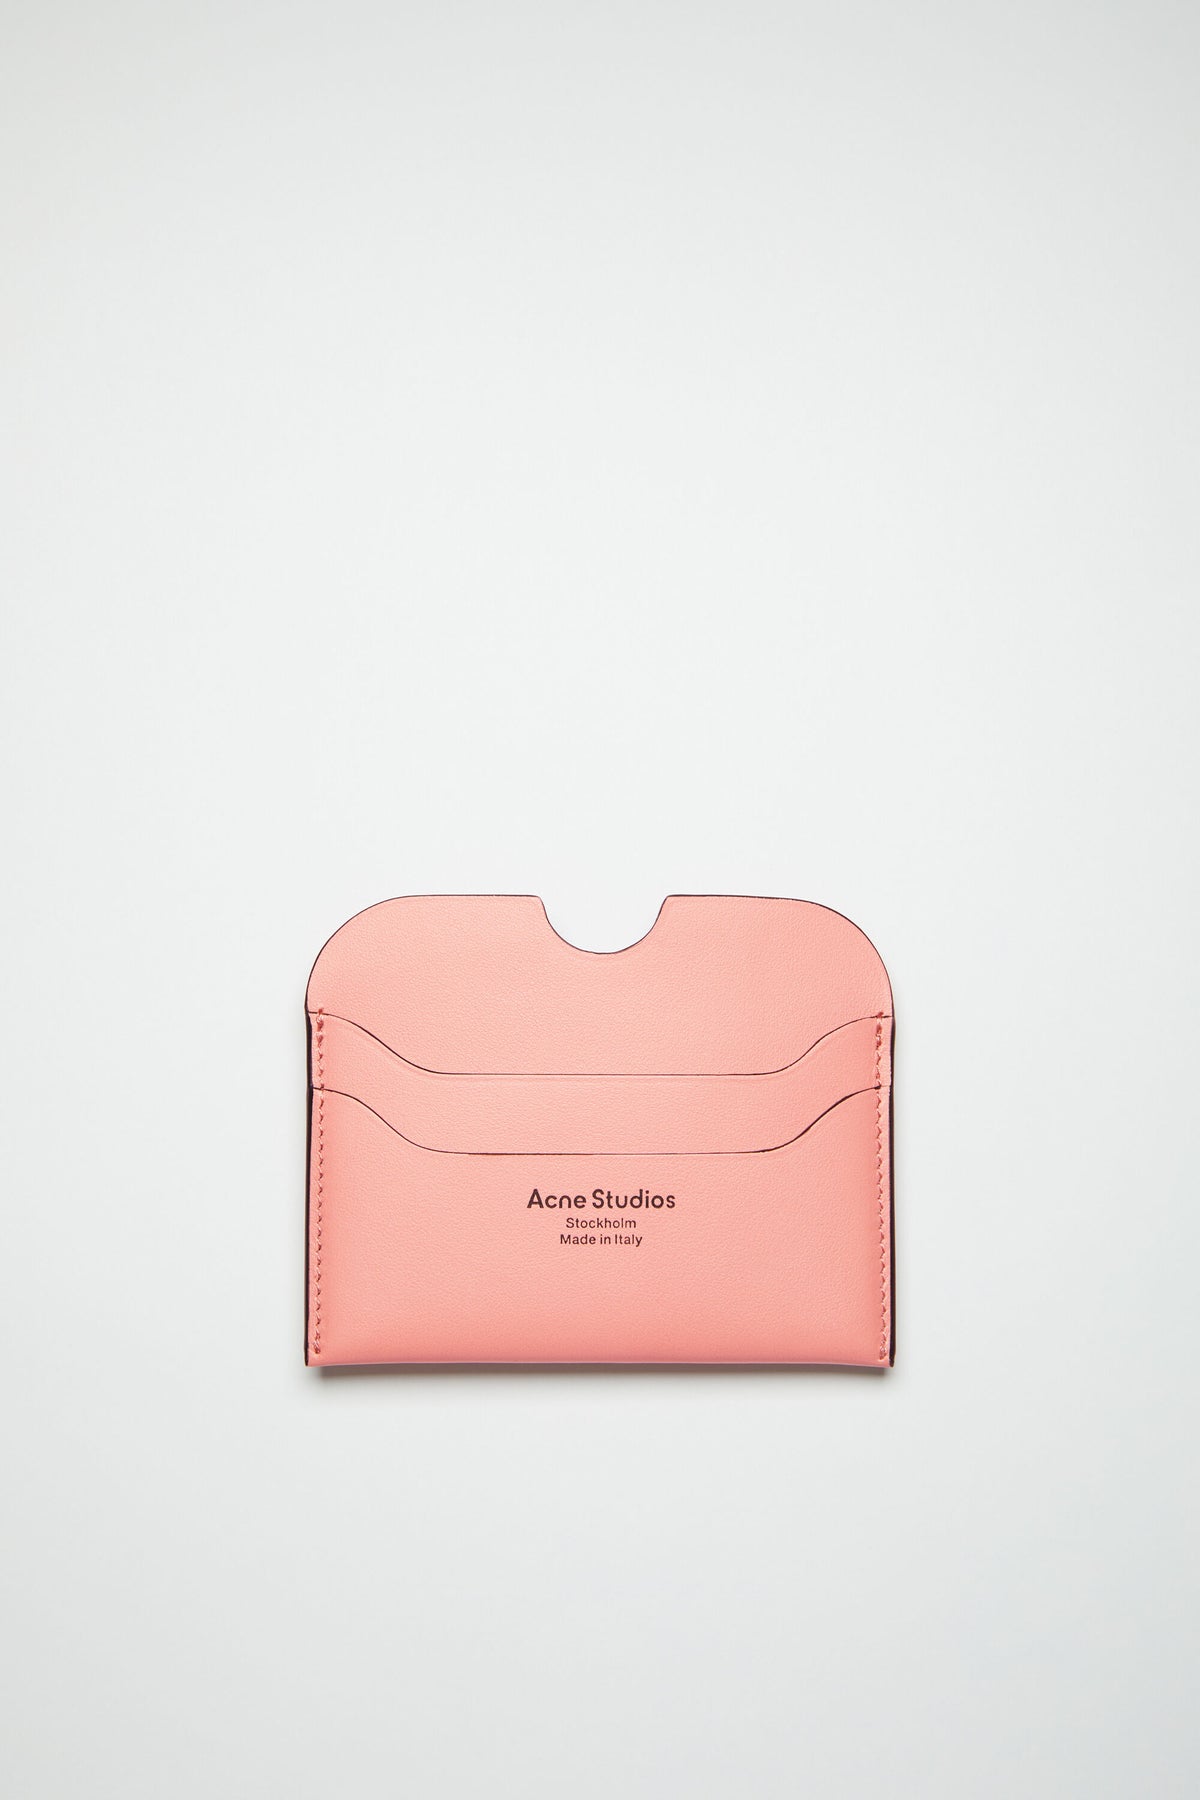 Small Leather Goods - Salmon Pink